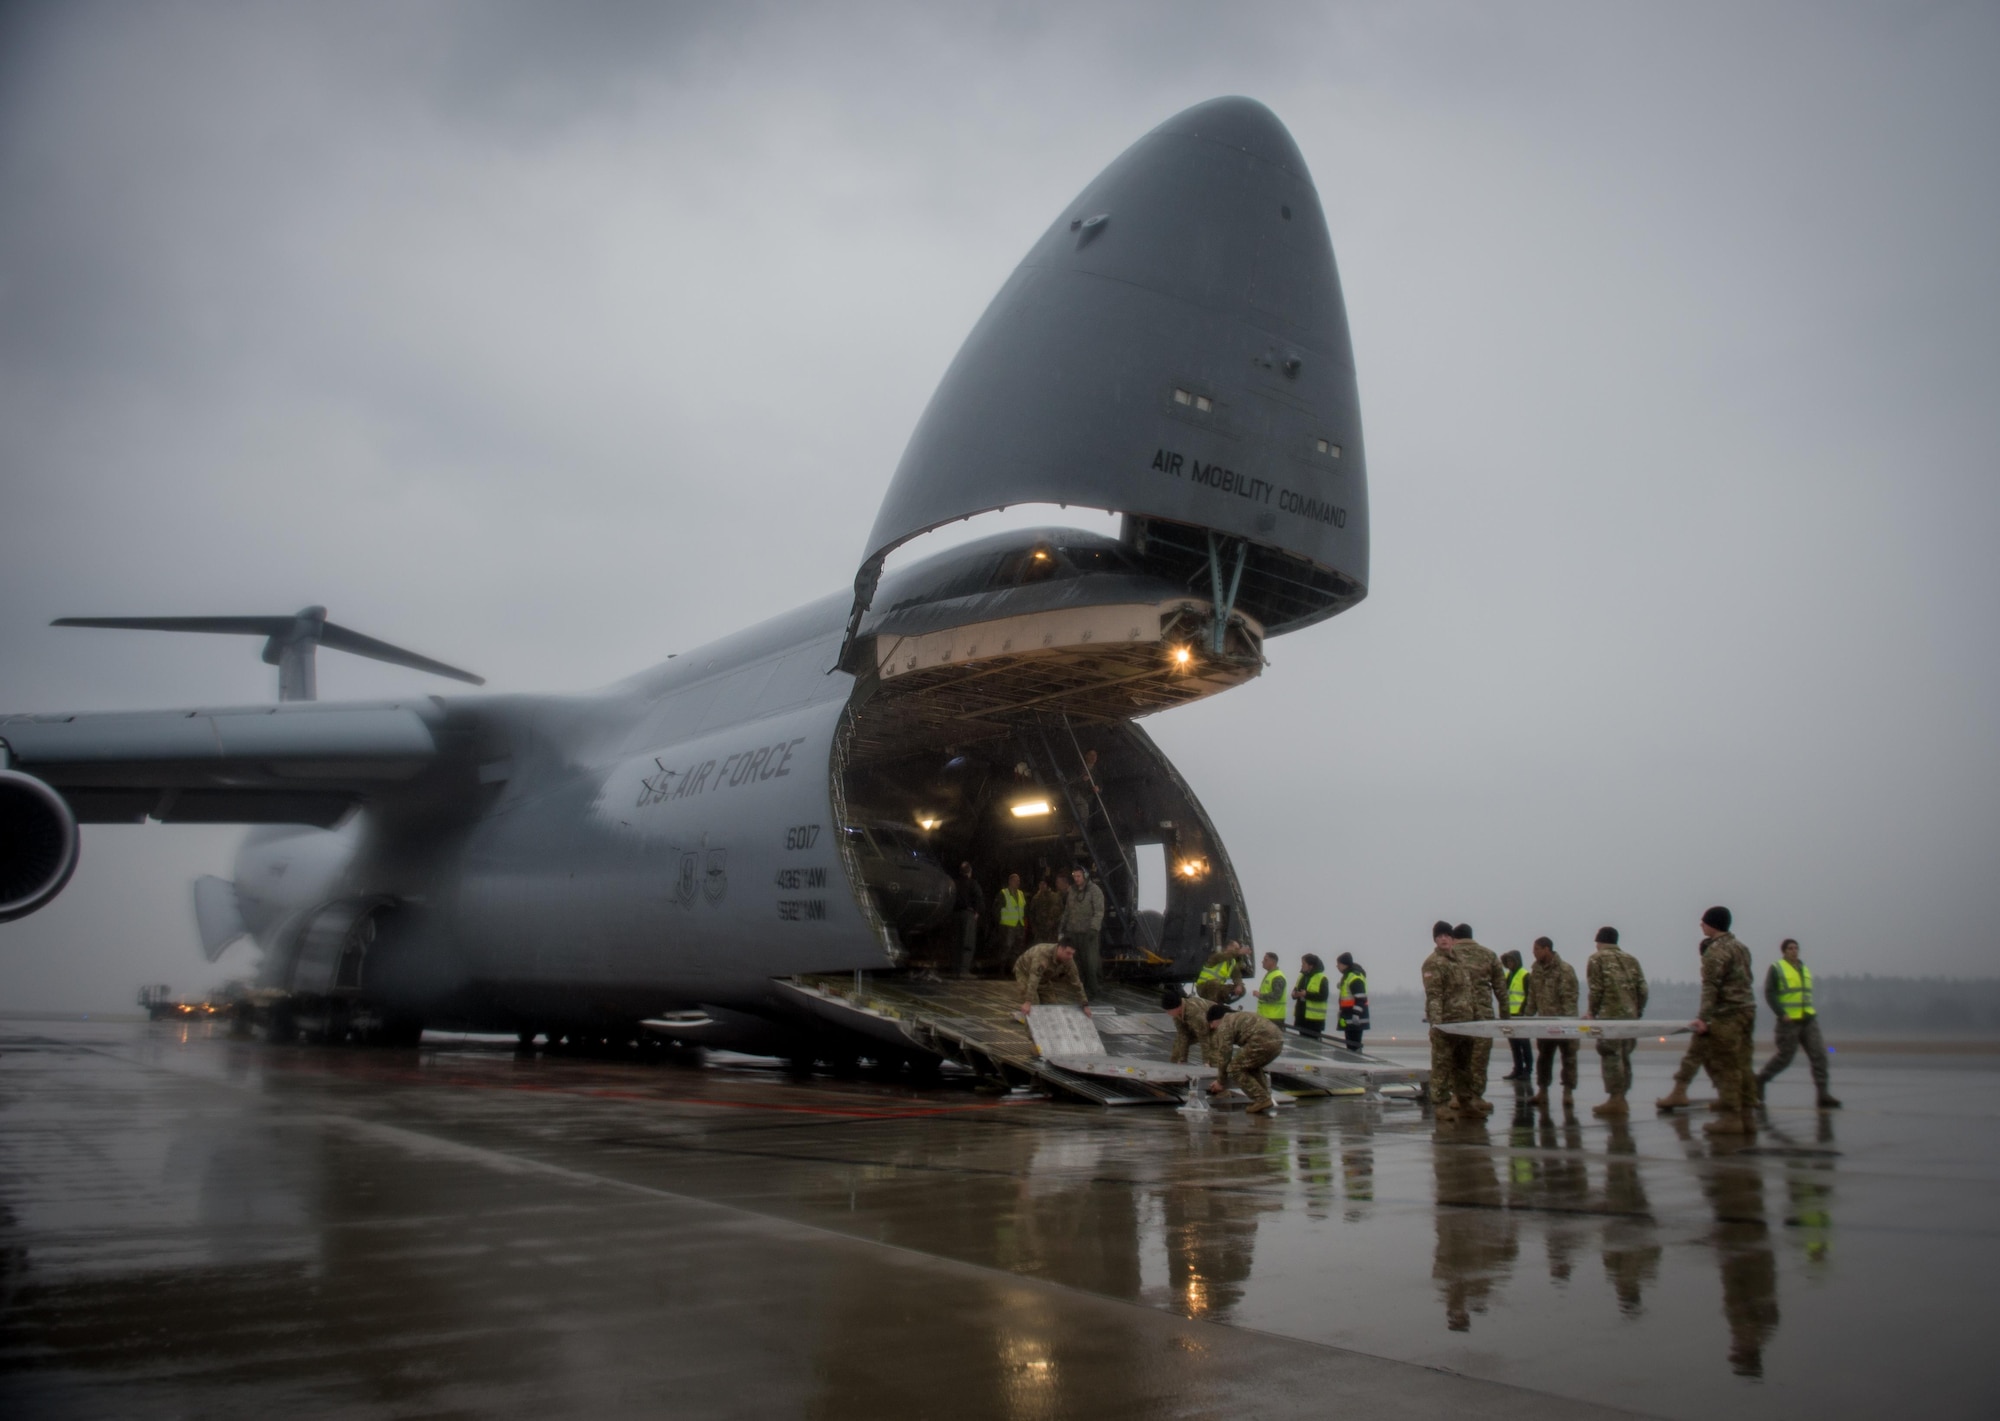 A U.S. Army UH-60 Black Hawk helicopter is unloaded from an Air Mobility Command C-5M Super Galaxy at Riga International Airport, Latvia, Mar. 1, 2017. Five Black Hawk helicopters will be deployed to Latvia as part of a larger contingent of helicopters and personnel deployed to support Operation Atlantic Resolve, a U.S. commitment to maintaining peace and stability in the European region. (U.S. Air Force photo/Tech. Sgt. Ryan Crane)